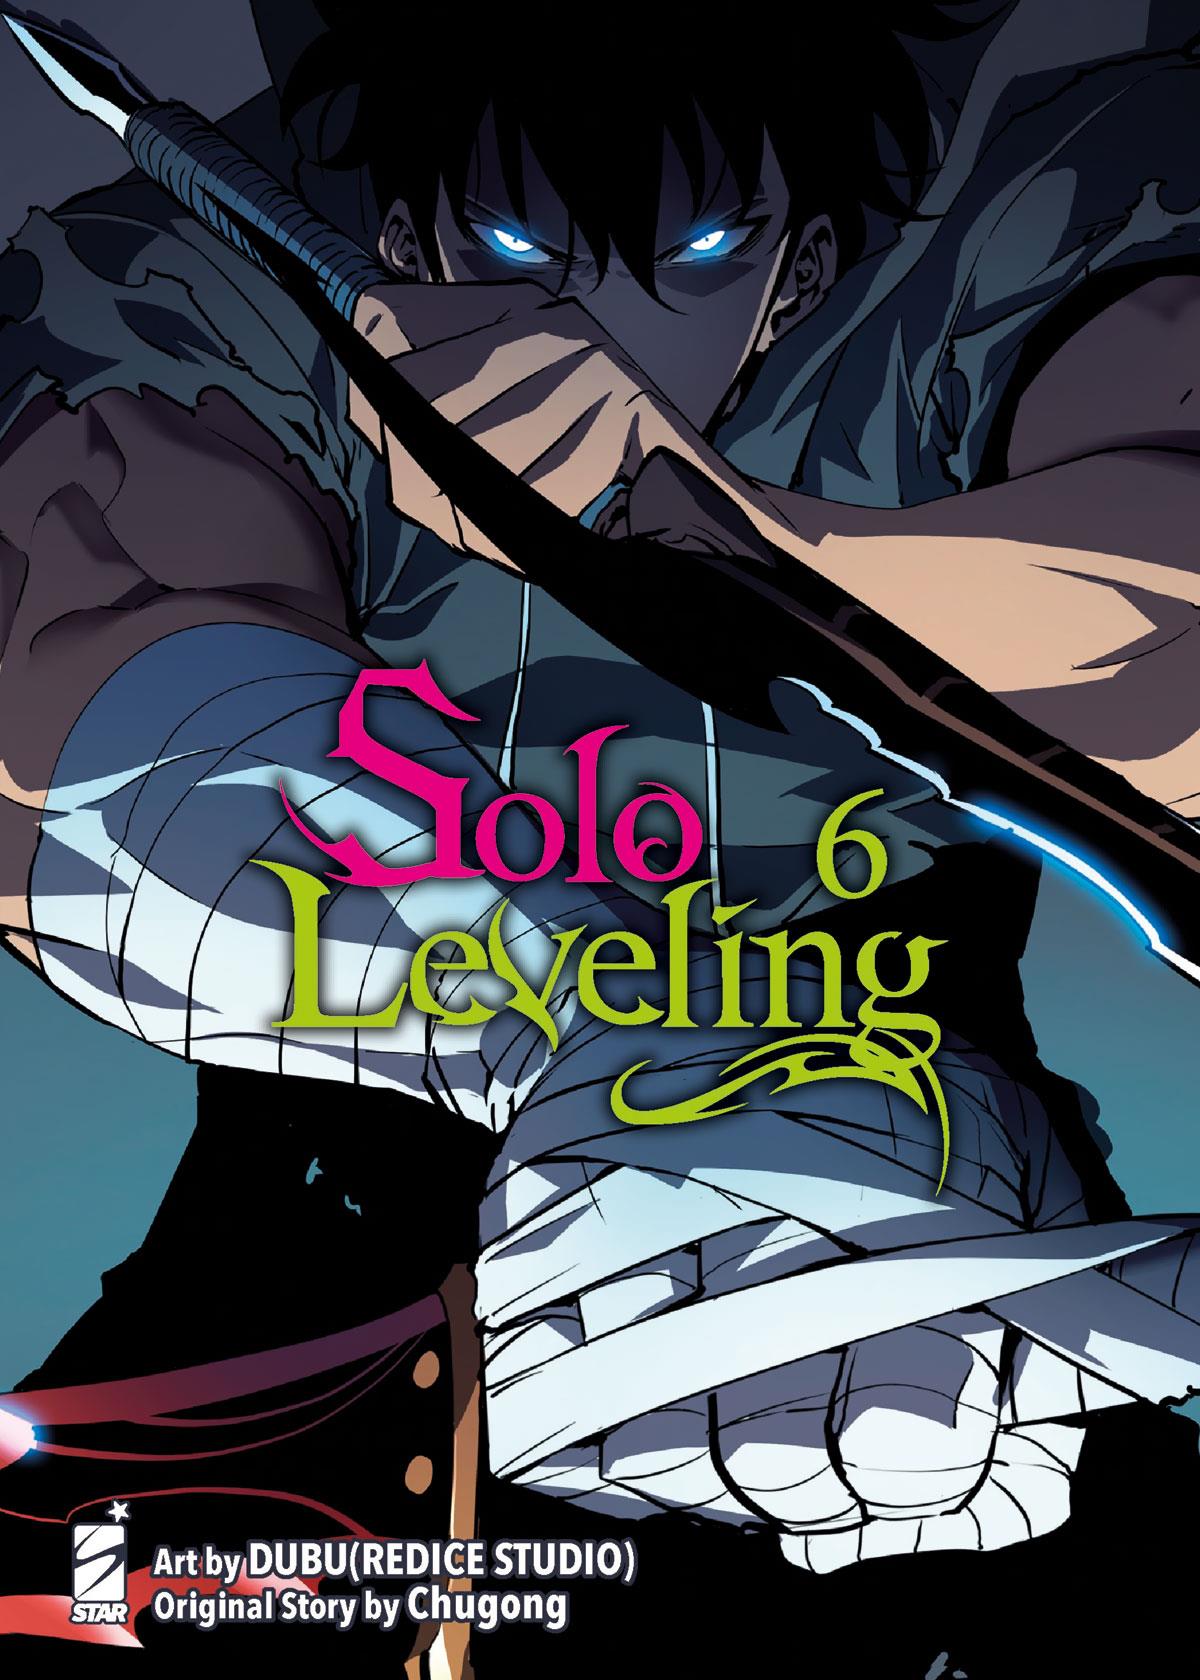 SOLO LEVELING 6